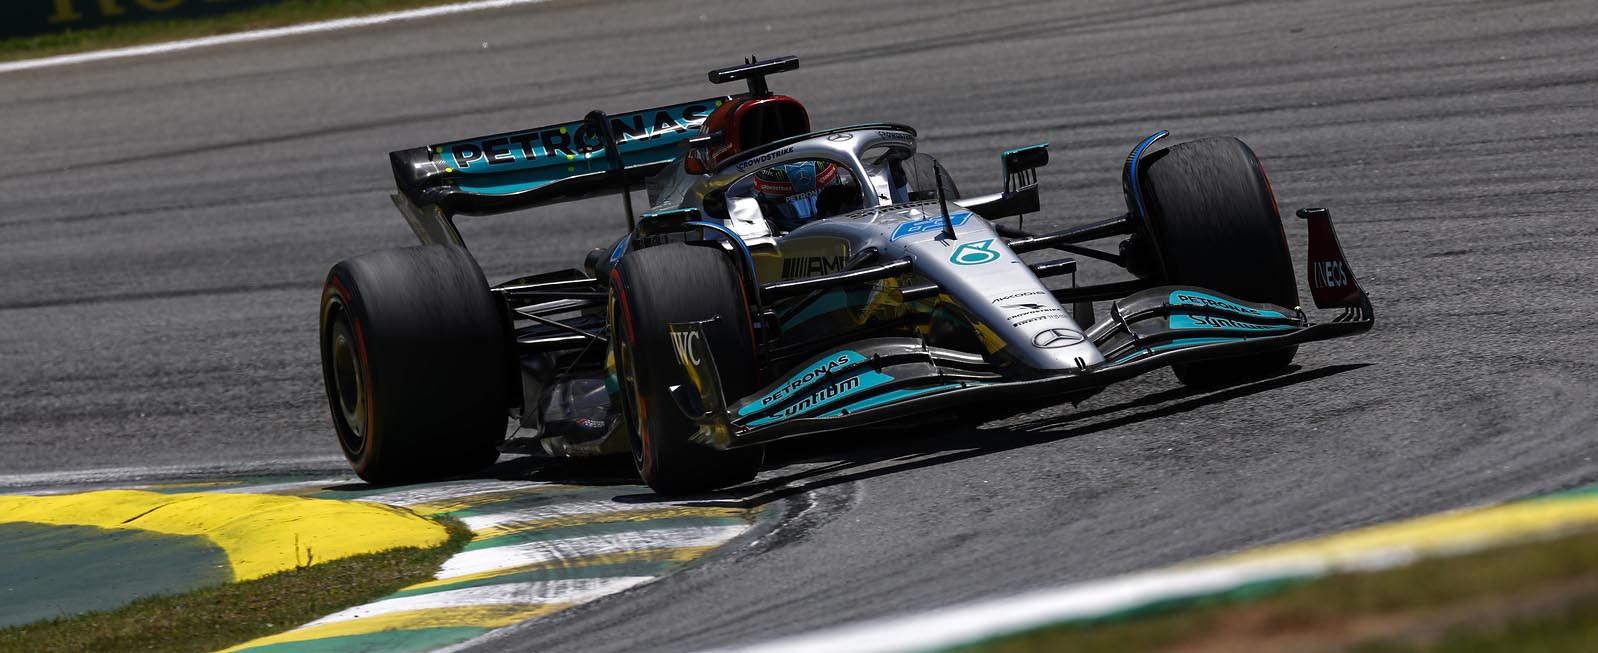 George Russell leading the 2022 Brazilian Grand Prix at São Paulo